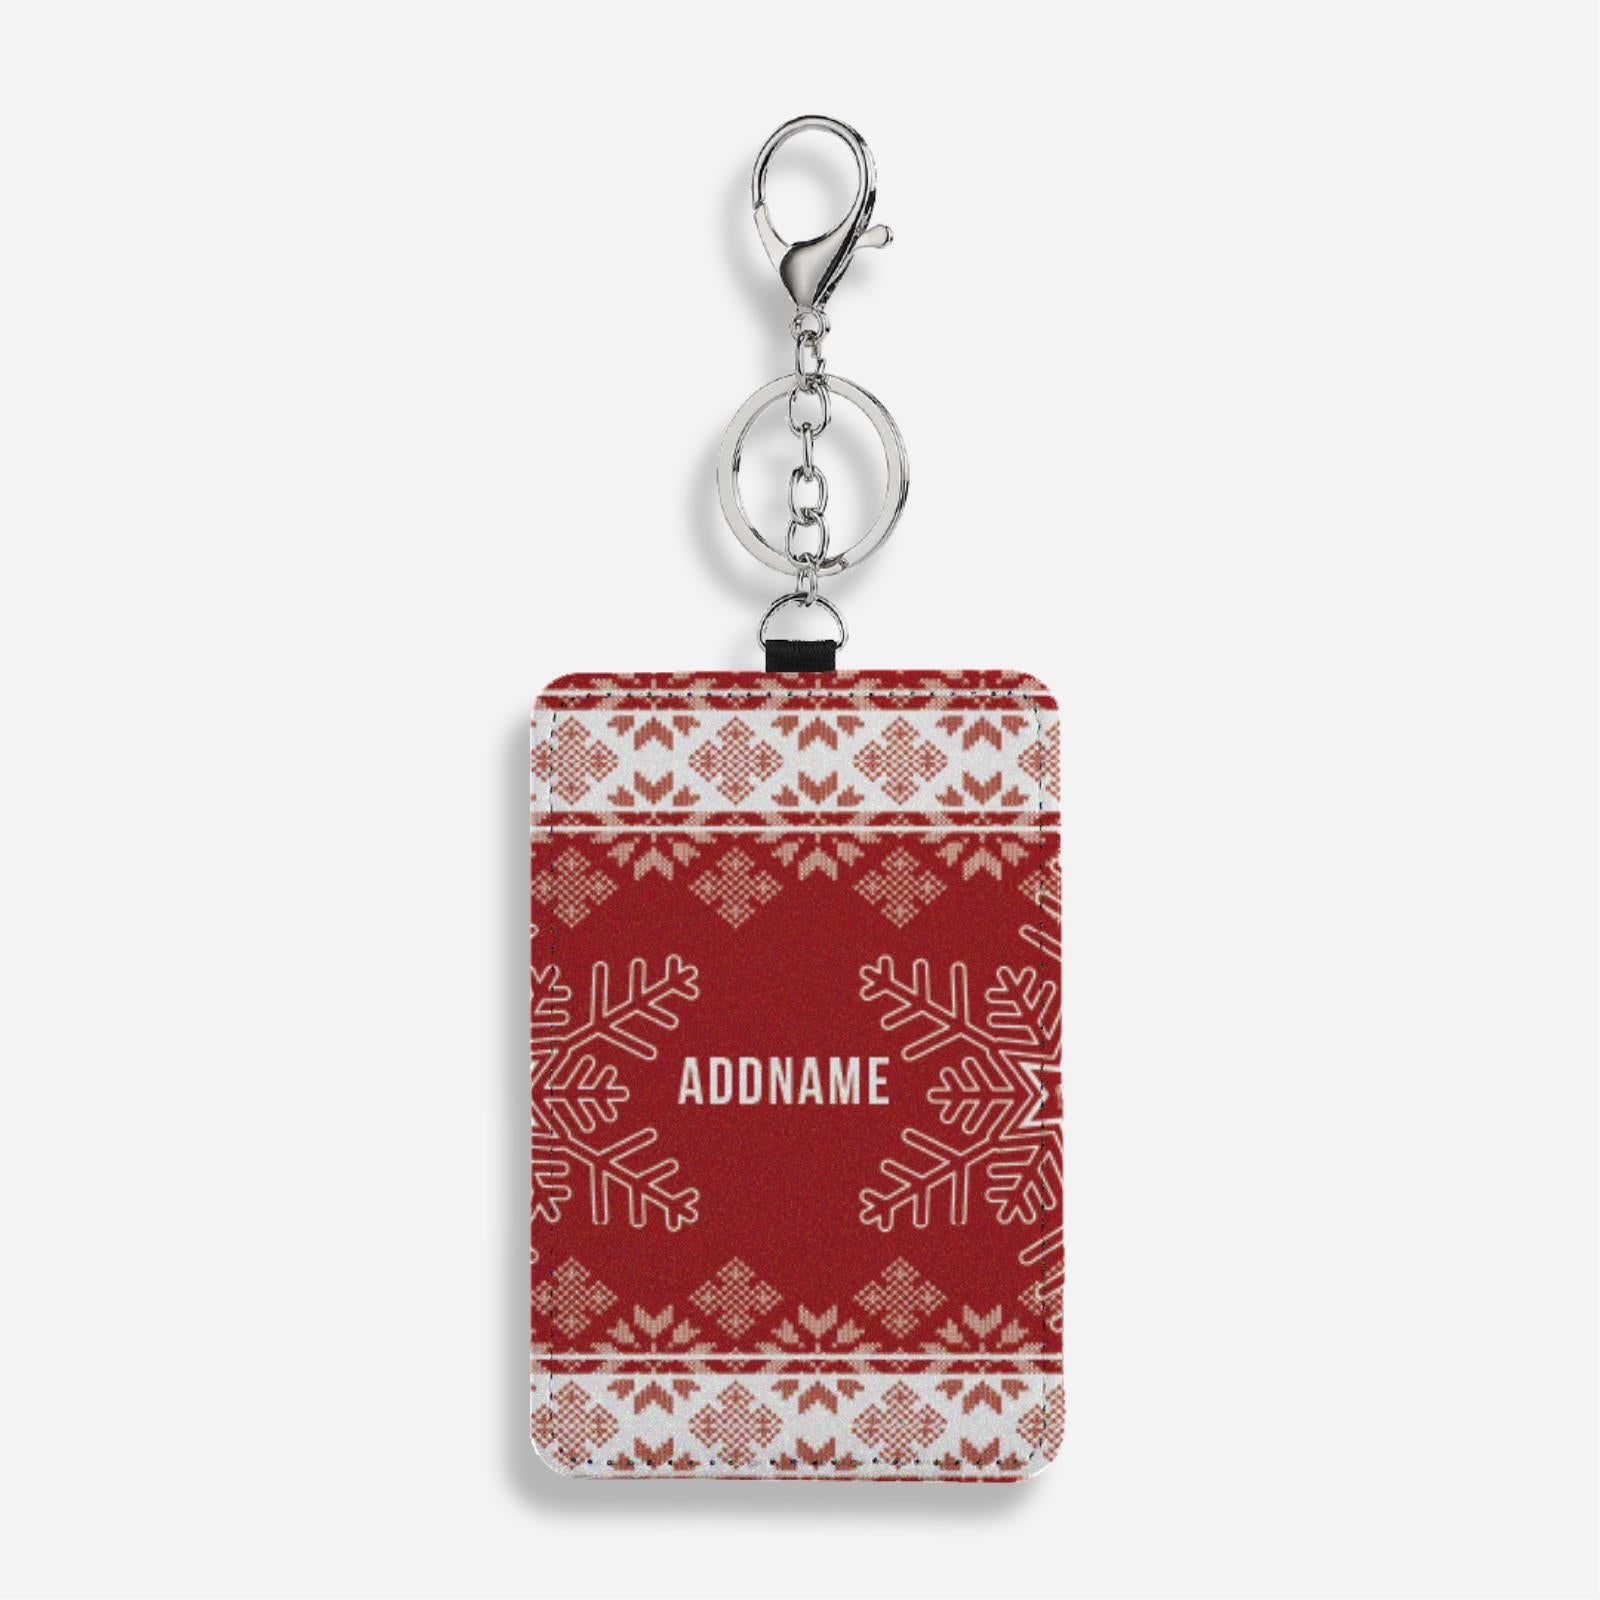 Christmas Series Cardholder With Keyring - Blissful Time